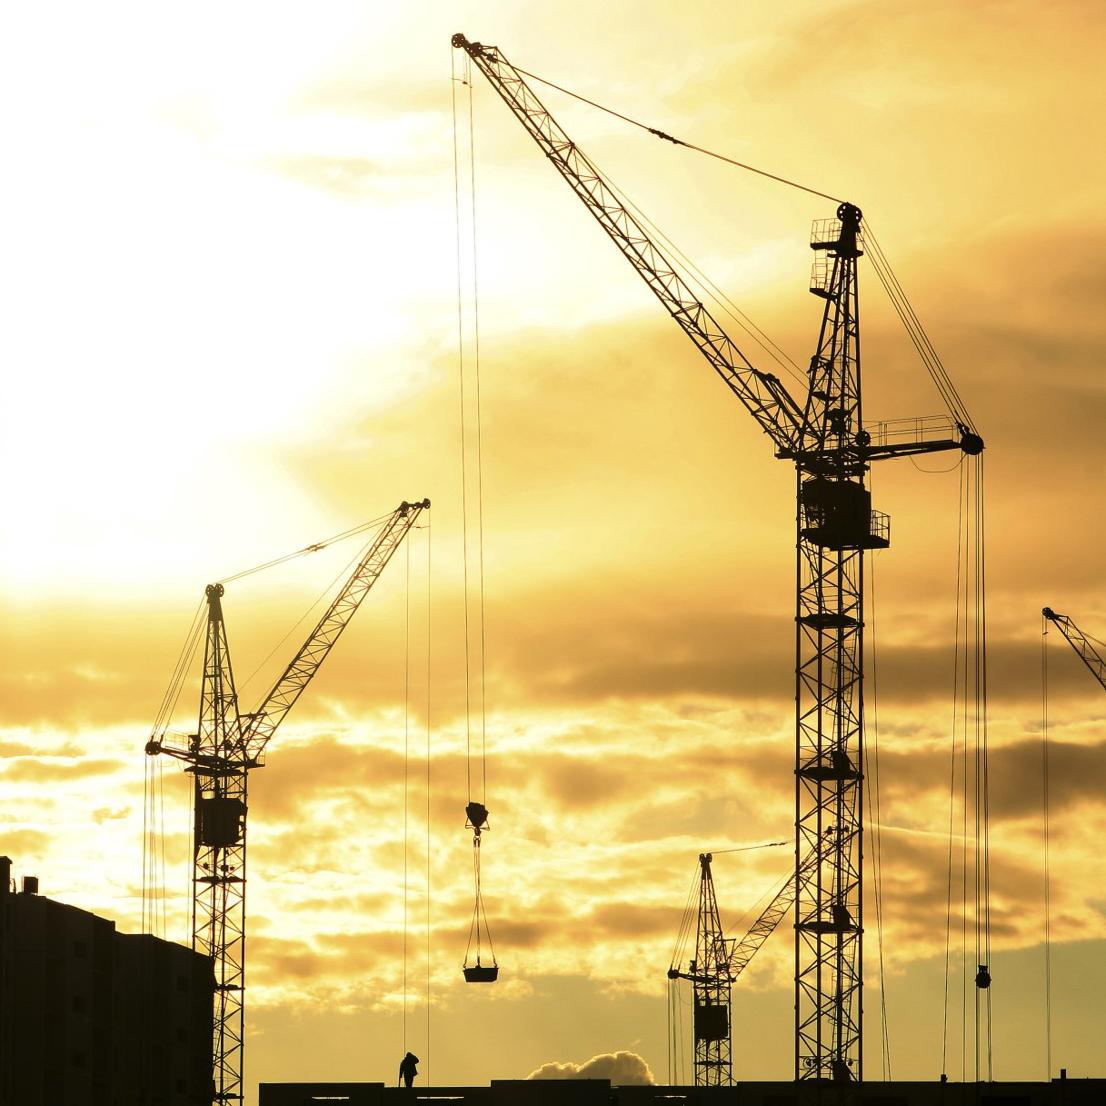 Picture shows a number of construction cranes against a yellow sunset cloudy sky